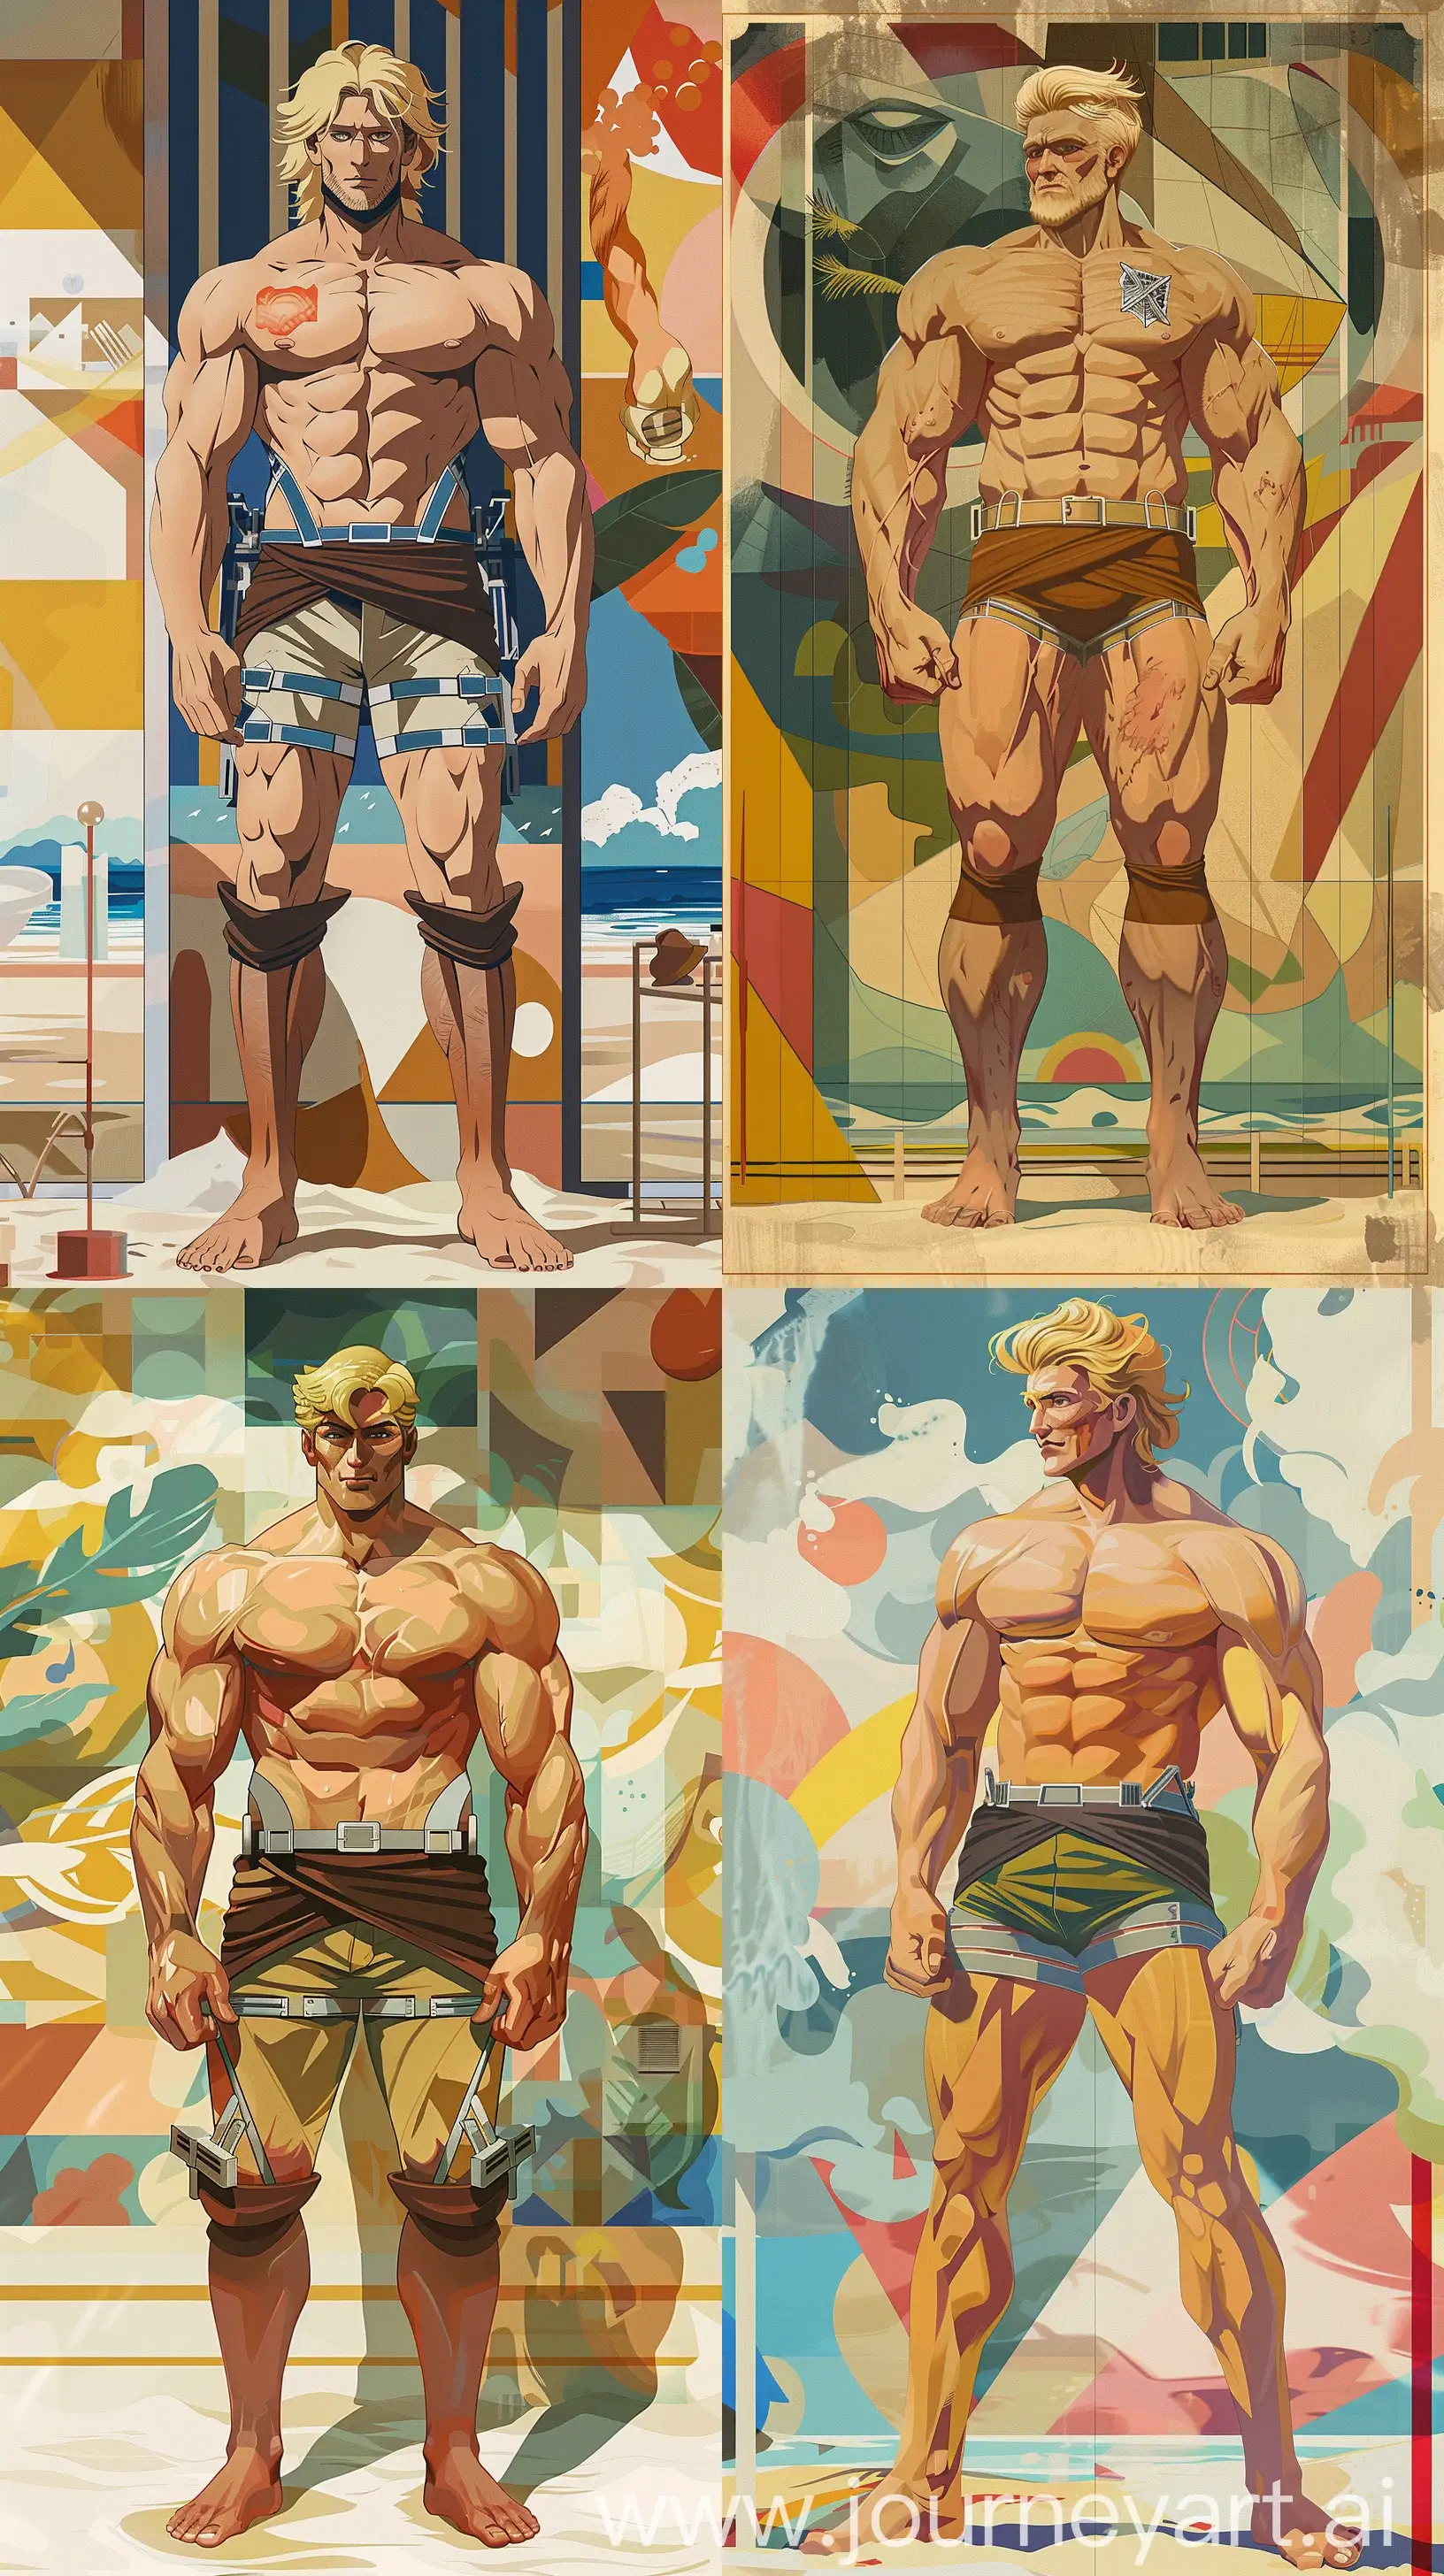 Generate a phone wallpaper that portrays Reiner Braun as a 50-year-old man, imagining his life beyond the "Attack on Titan" series. Depict him as a big, strong, blonde, and muscular figure, wearing a a short  at beach, chest hair , with a serene expression. His posture is relaxed, and he's surrounded by a Du Pasquier-esque vibrant domestic setting, complete with abstract shapes and patterns that reflect his complex past and a more peaceful present. --ar 9:16
